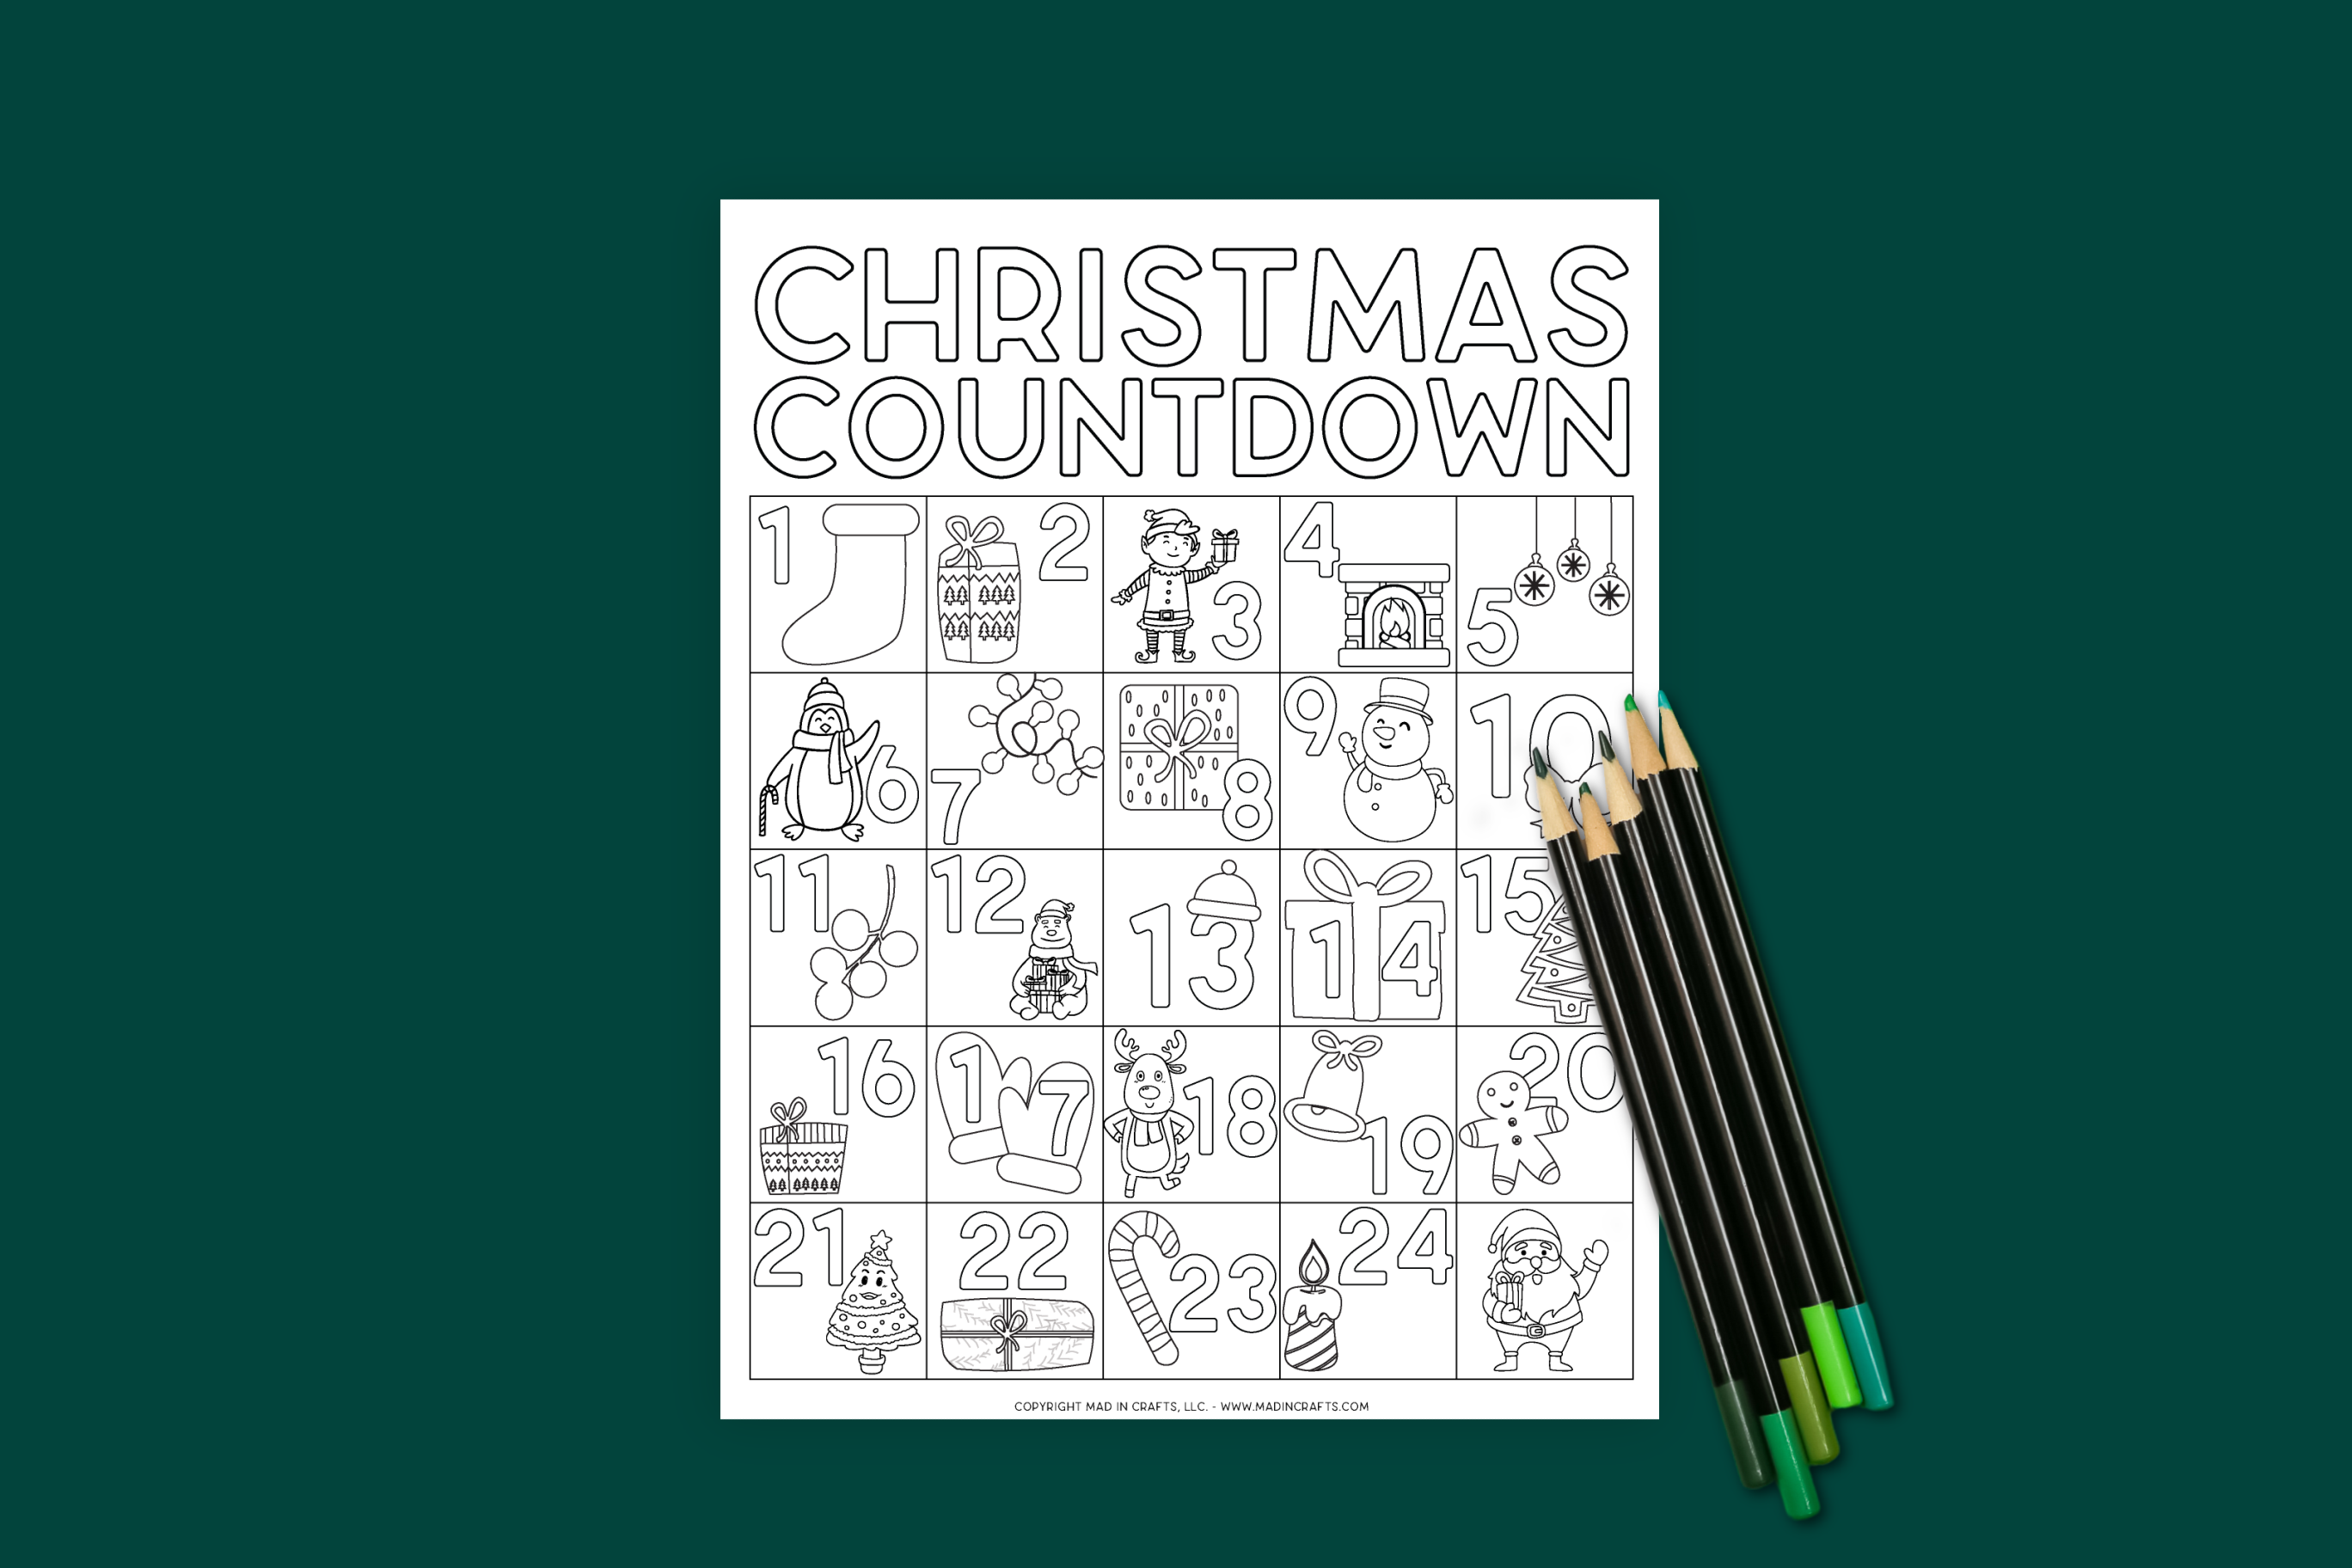 Christmas coloring countdown calendar and colored pencils on a dark green background